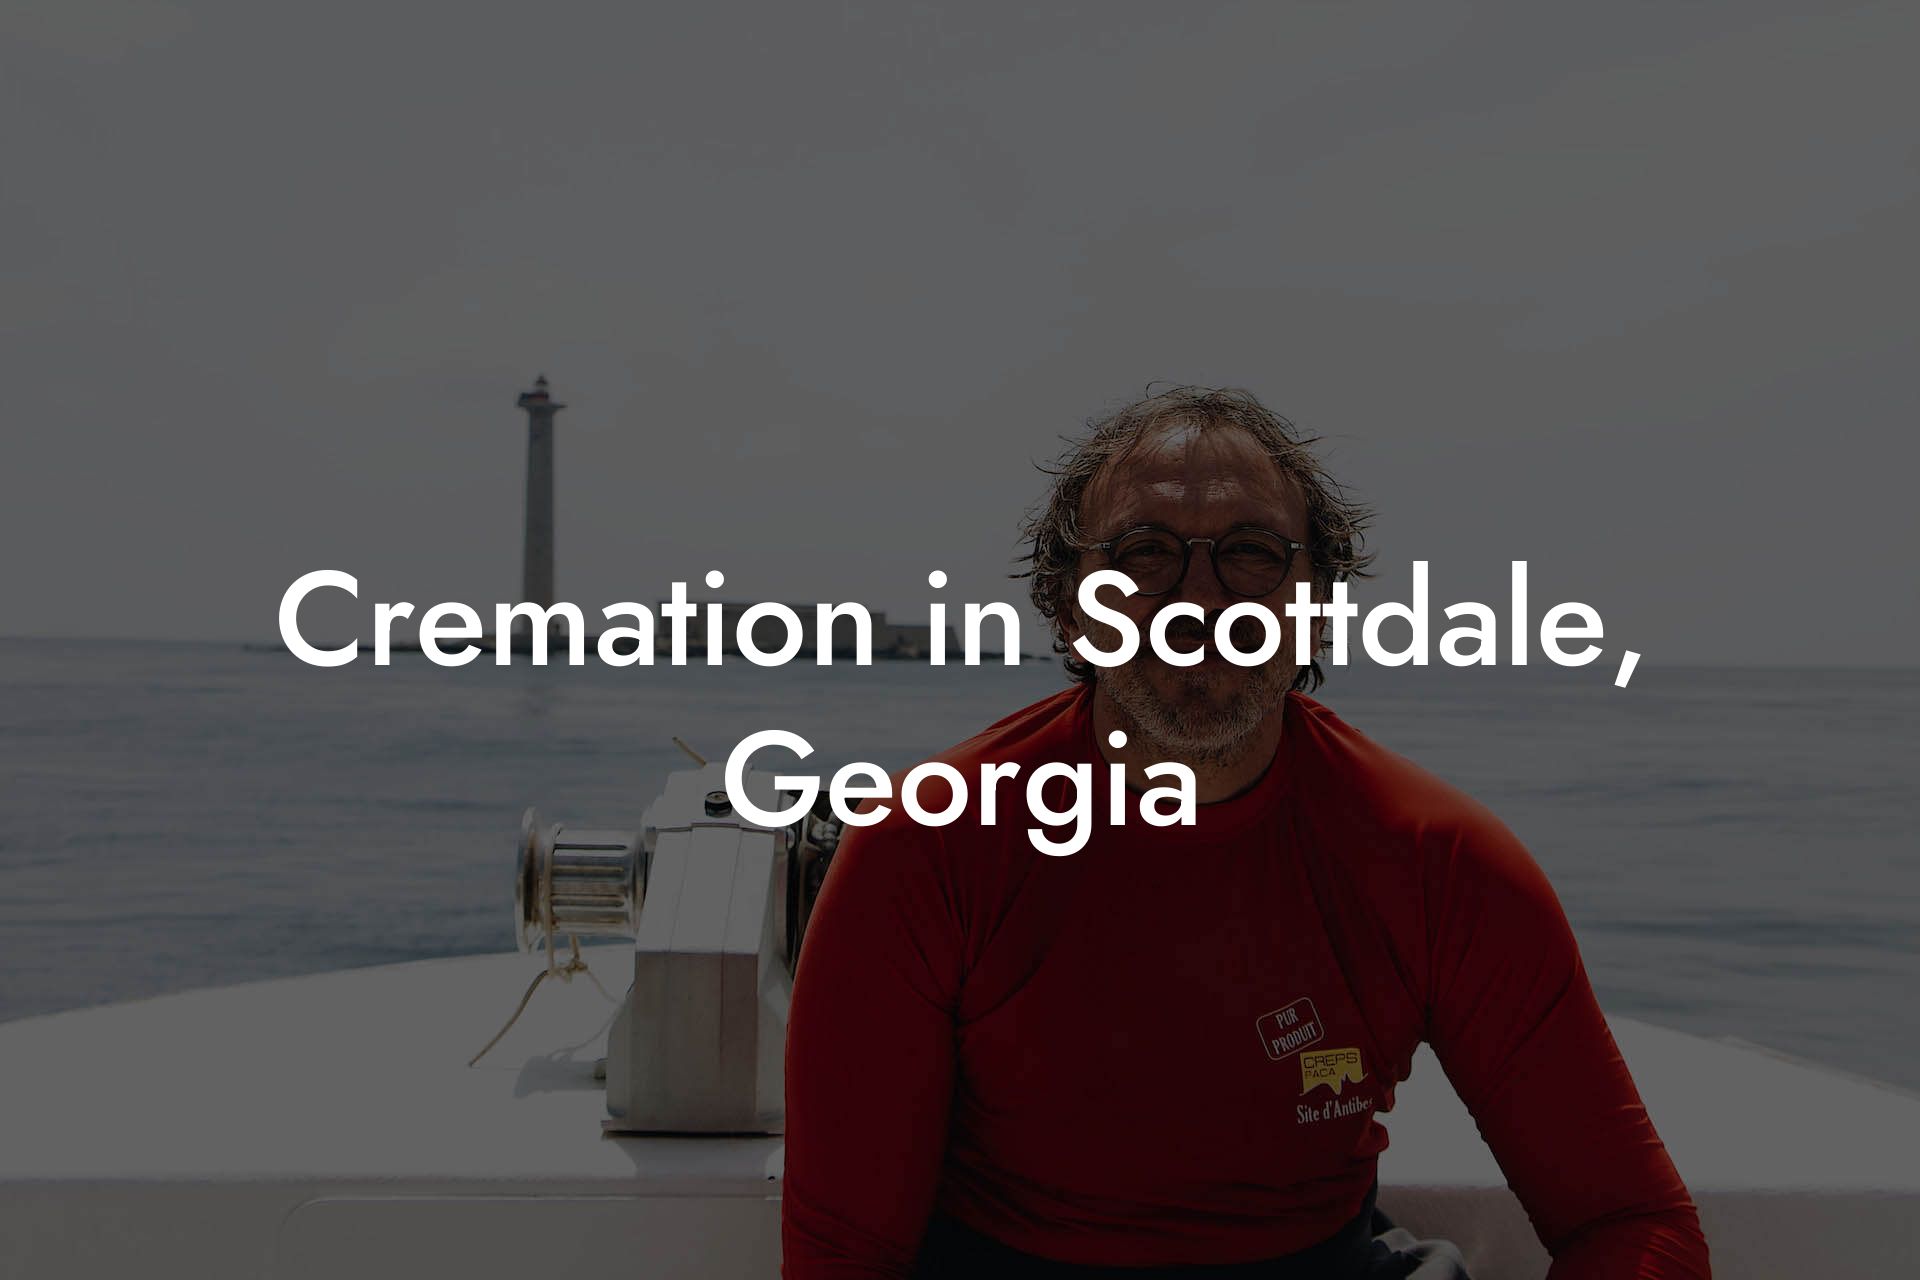 Cremation in Scottdale, Georgia